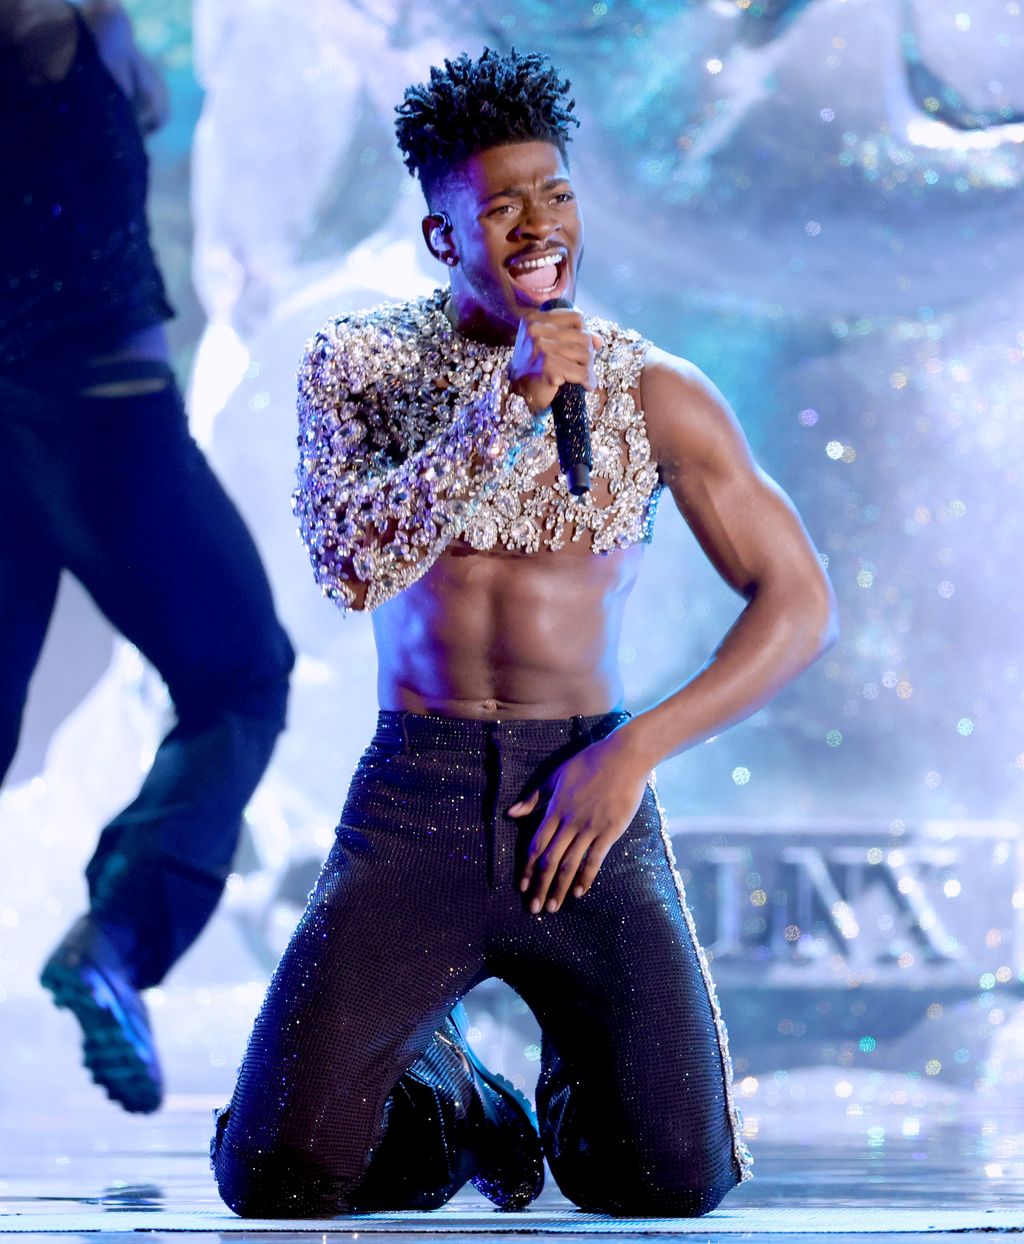 LAS VEGAS, NEVADA - APRIL 03: Lil Nas X performs onstage during the 64th Annual GRAMMY Awards at MGM Grand Garden Arena on April 03, 2022 in Las Vegas, Nevada. (Photo by Rich Fury/Getty Images for The Recording Academy)